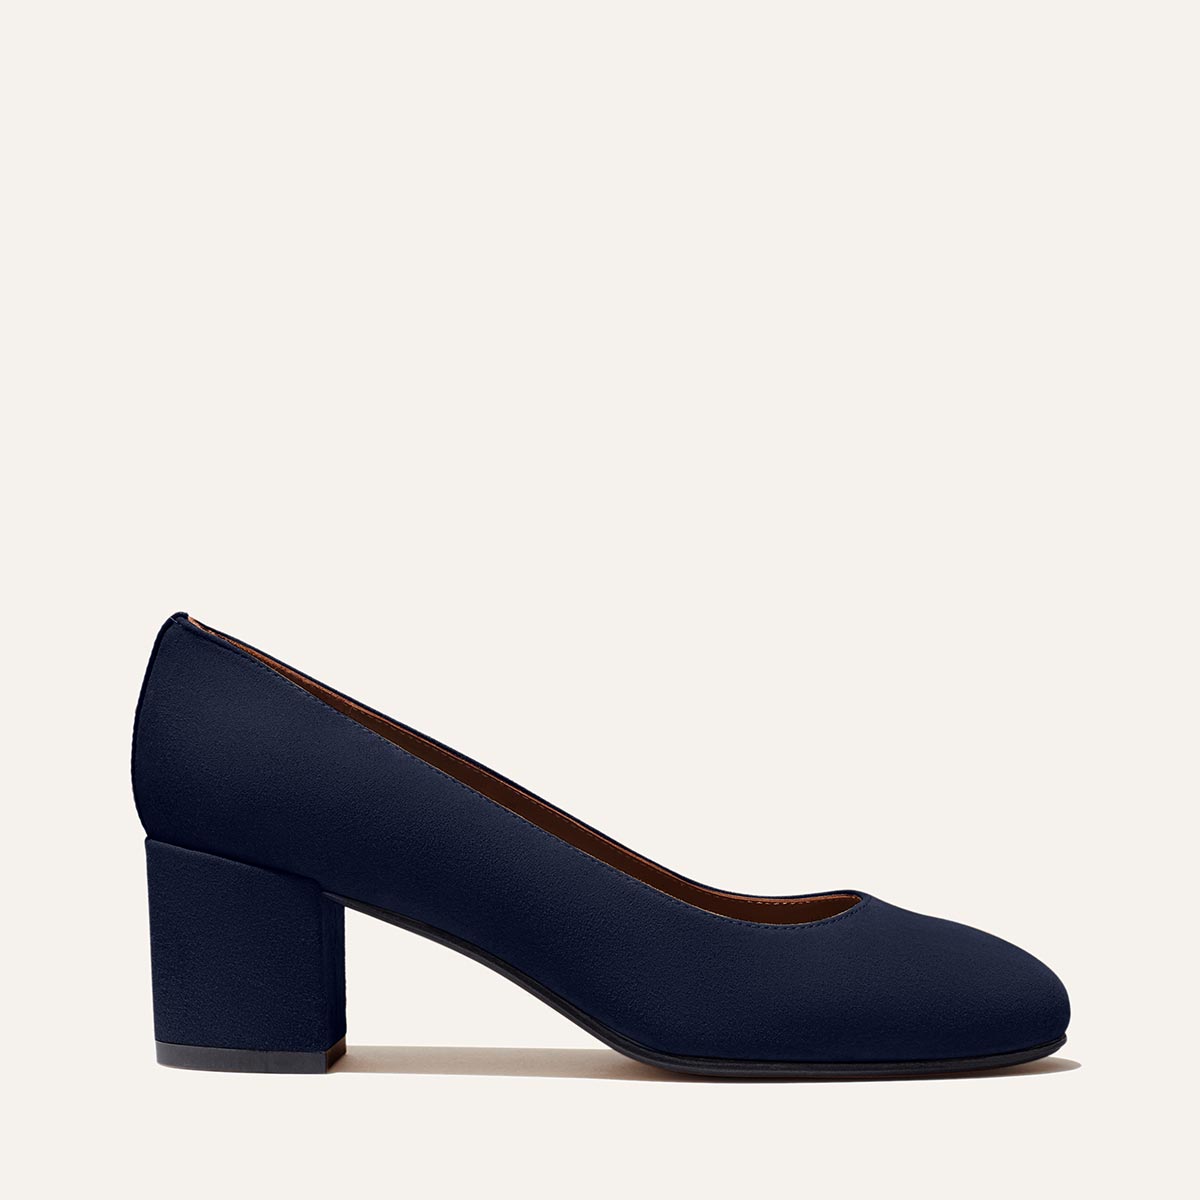 Margaux's classic and comfortable workwear Heel, made in Spain from soft, navy Italian suede